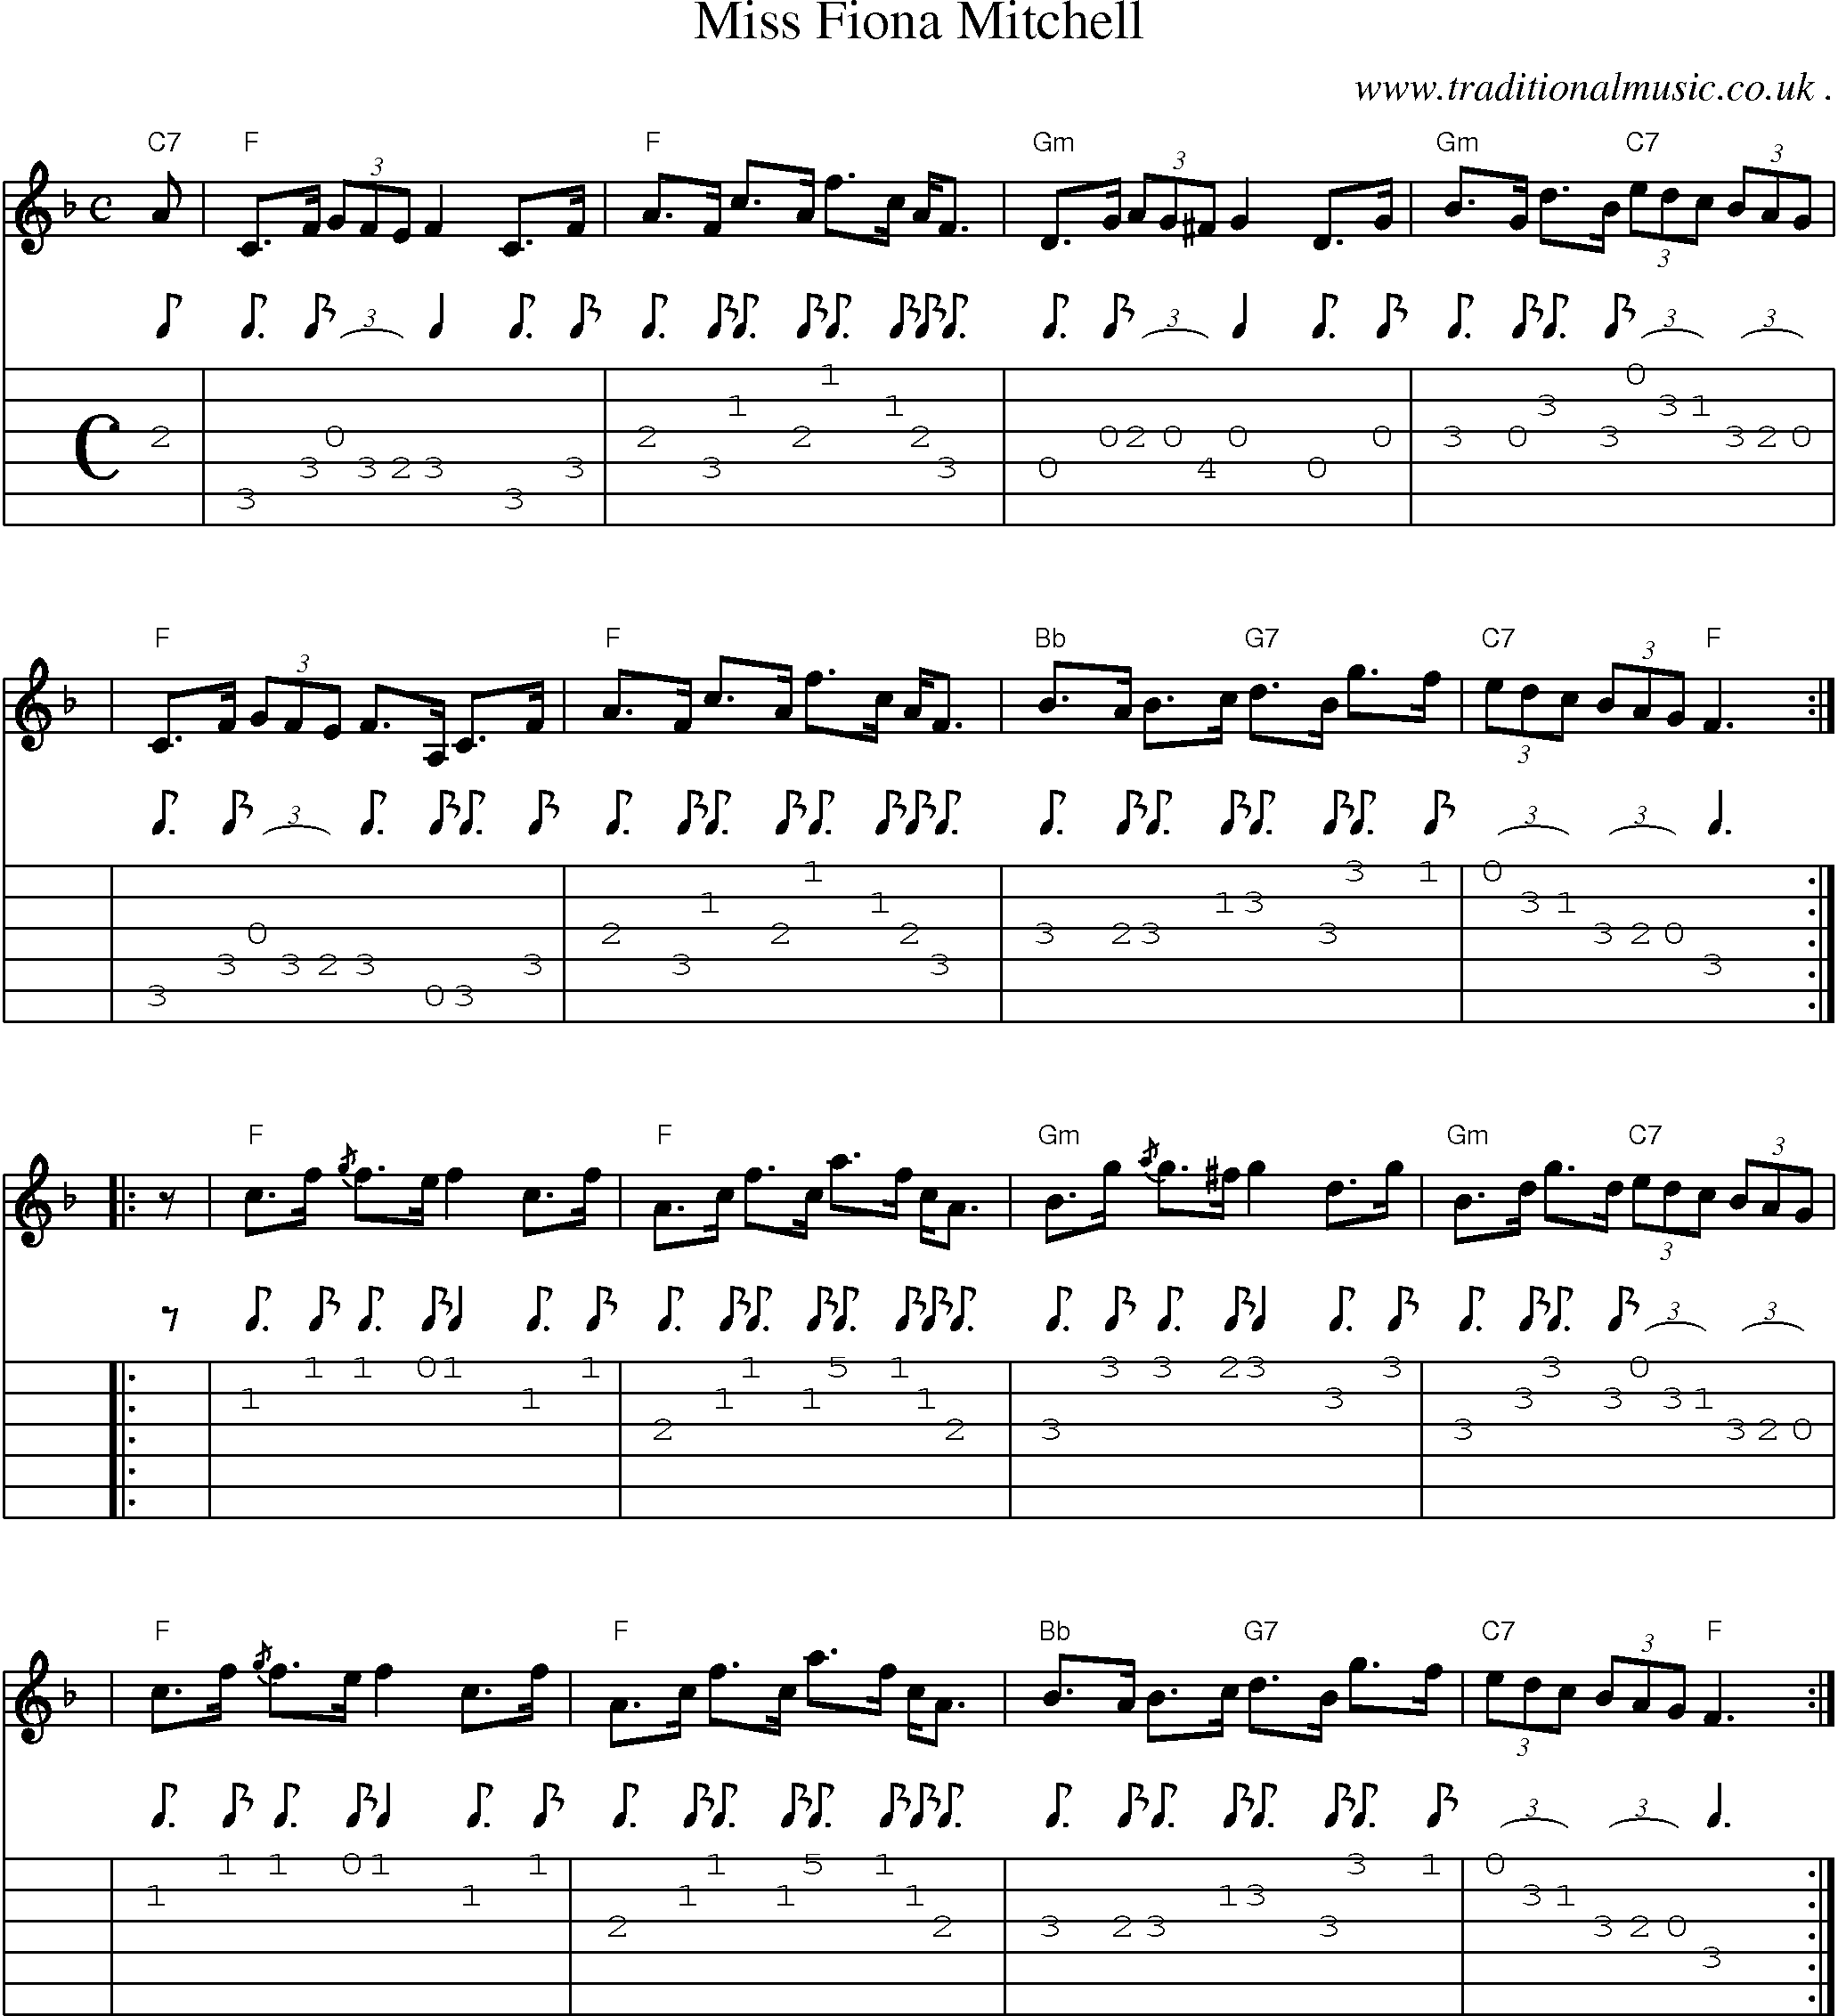 Sheet-music  score, Chords and Guitar Tabs for Miss Fiona Mitchell